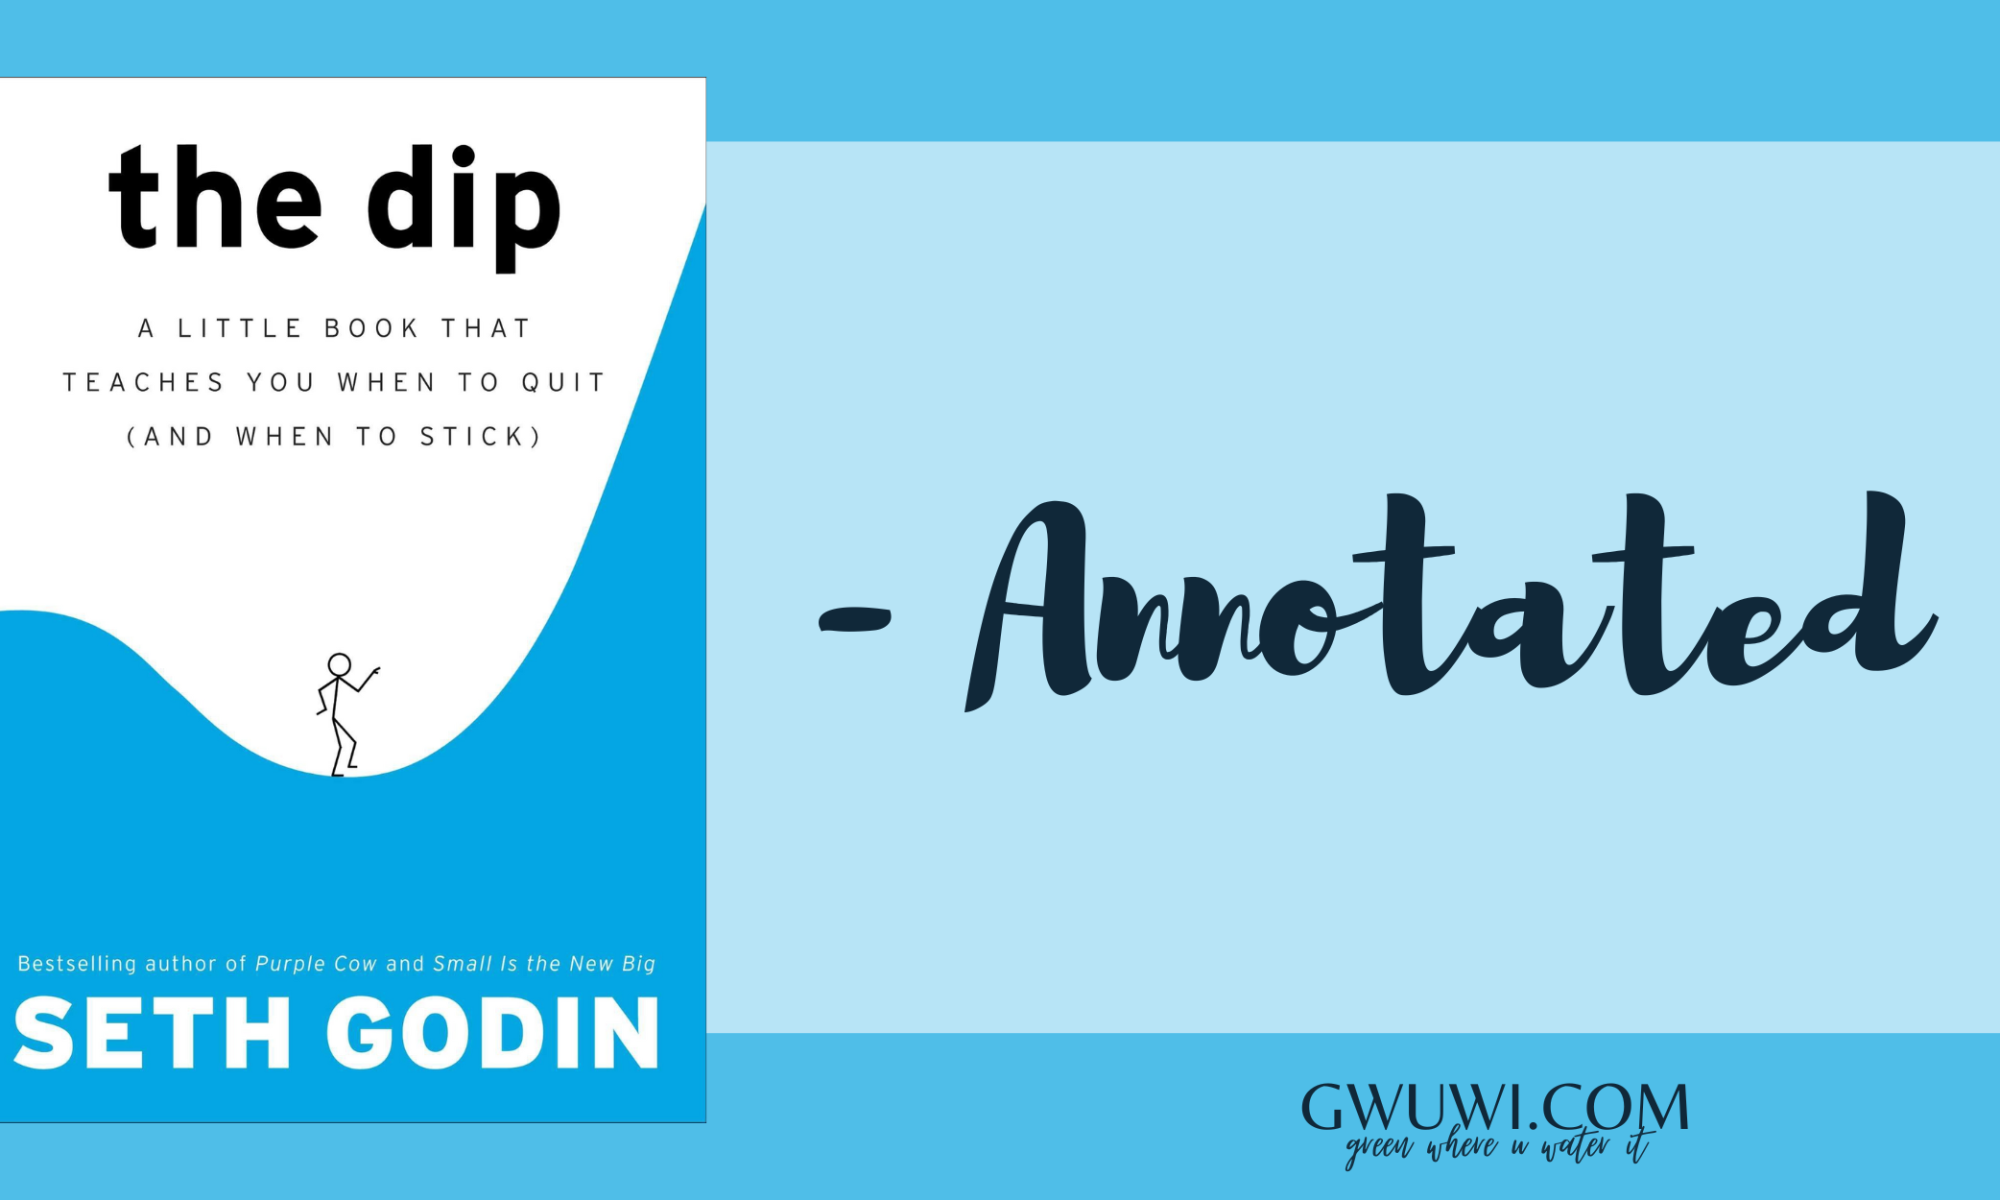 A picture of the book cover for "The Dip" written by Seth Godin, with the following text beside it: "Annotated"